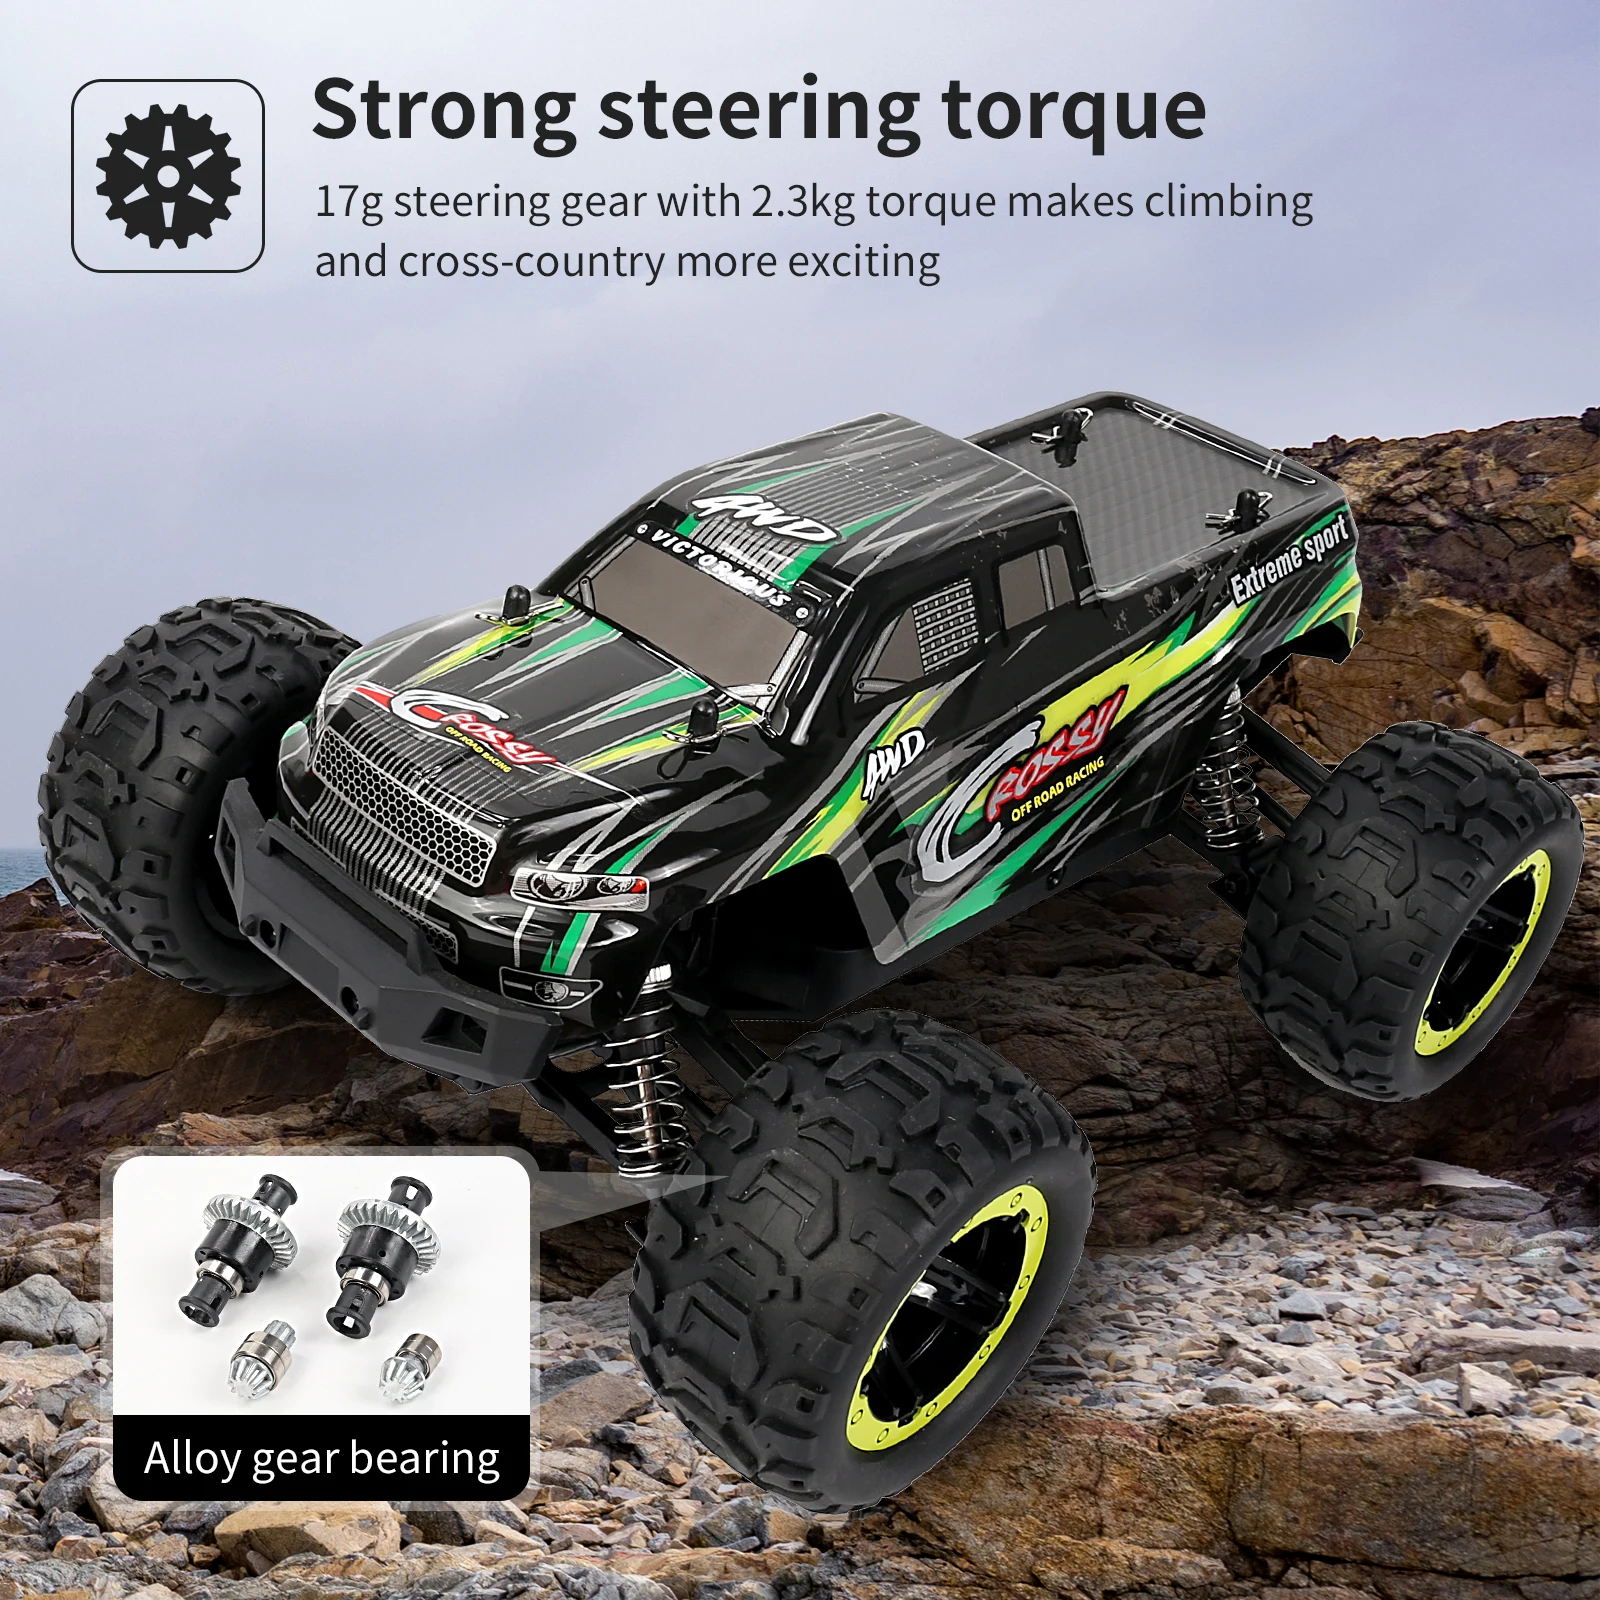 

RC Cars 1:16 Remote Control Vehicle 40Km / H with 2.4 Ghz Radio Controller Off-Road Vehicle for Children and Adults